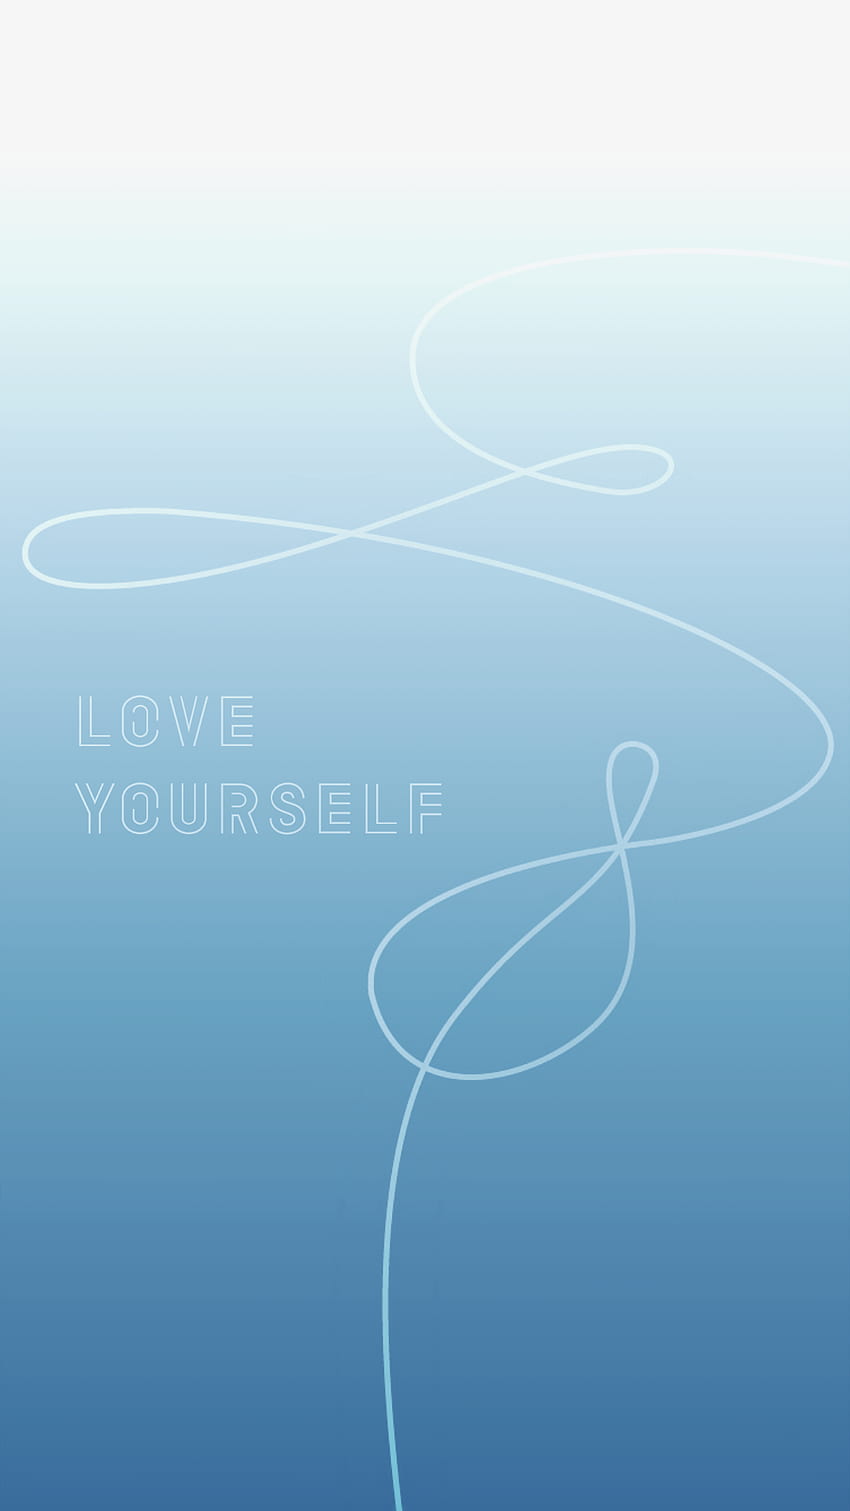 Top Love Yourself Bts Logo Meaning Most Downloaded